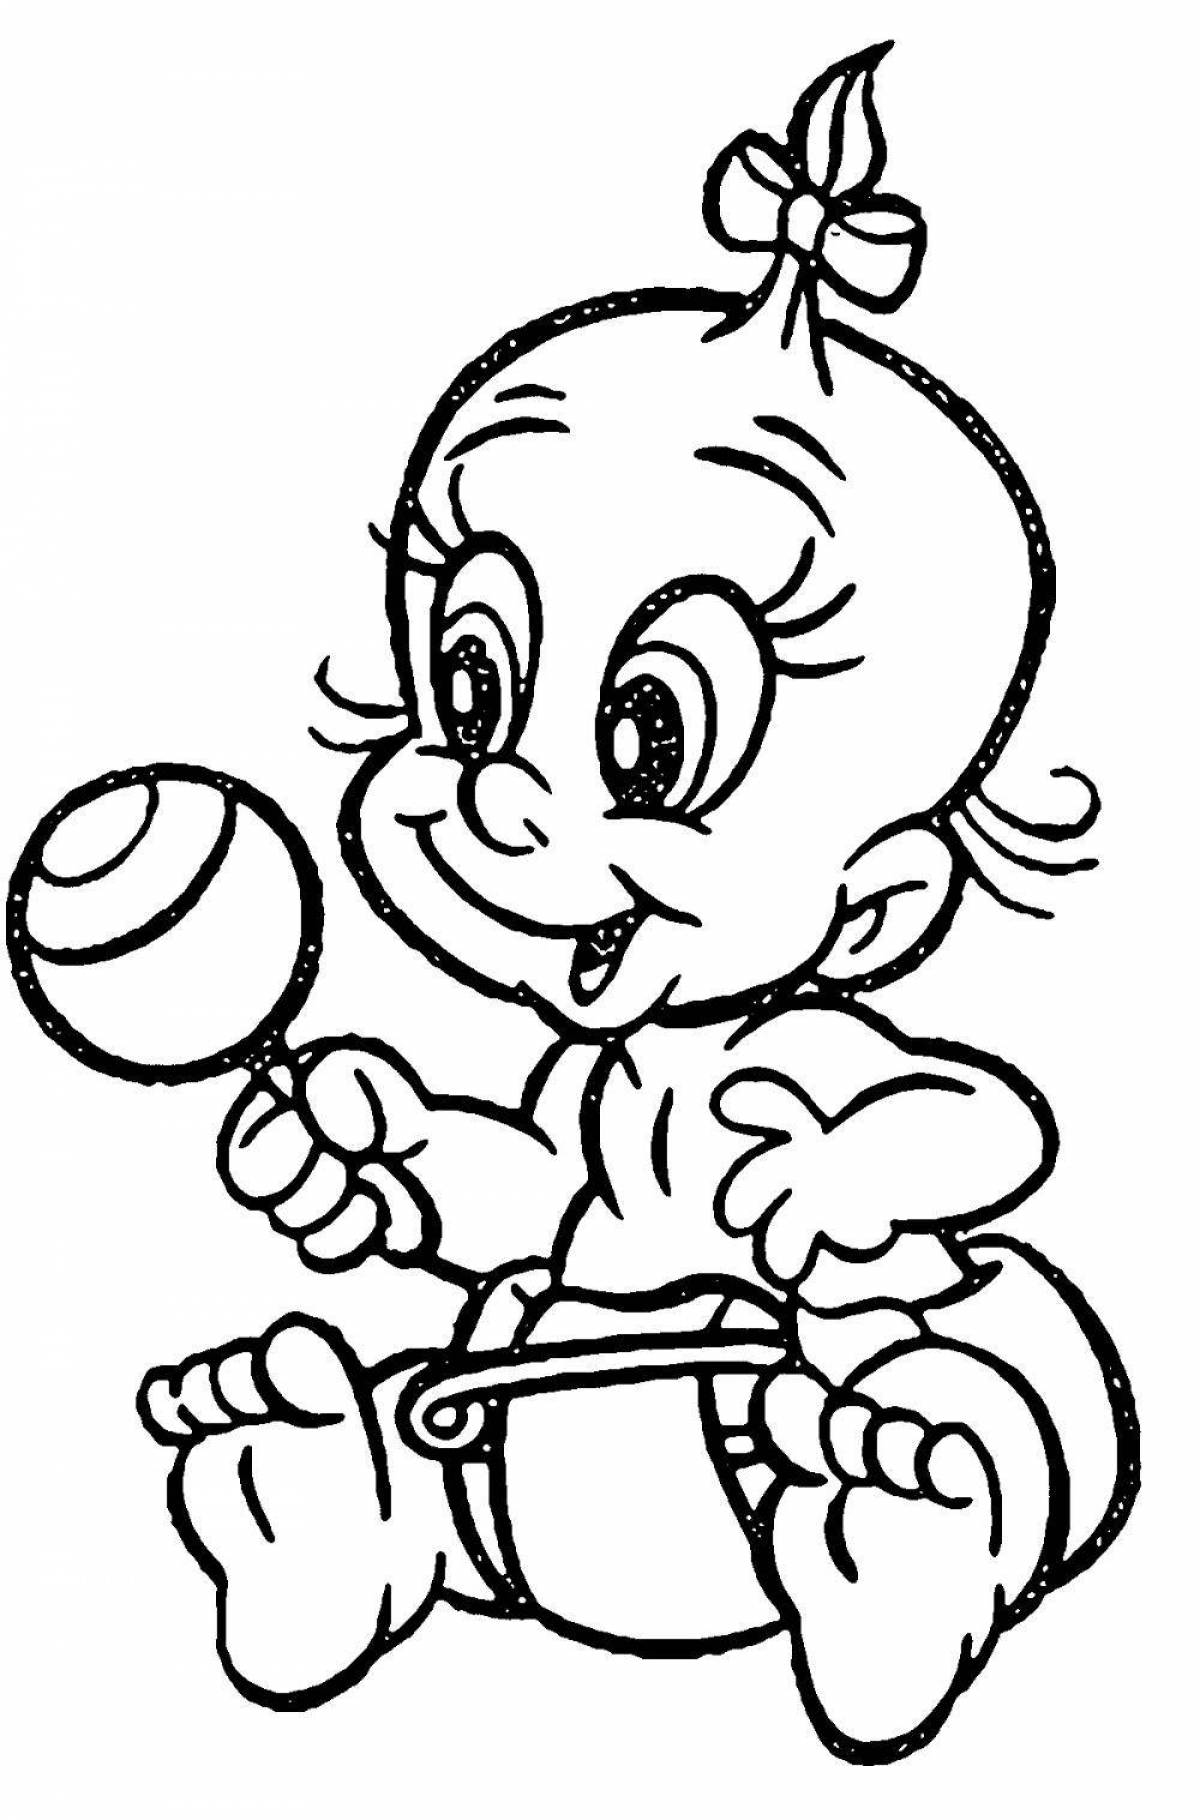 Amazing coloring pages for dolls